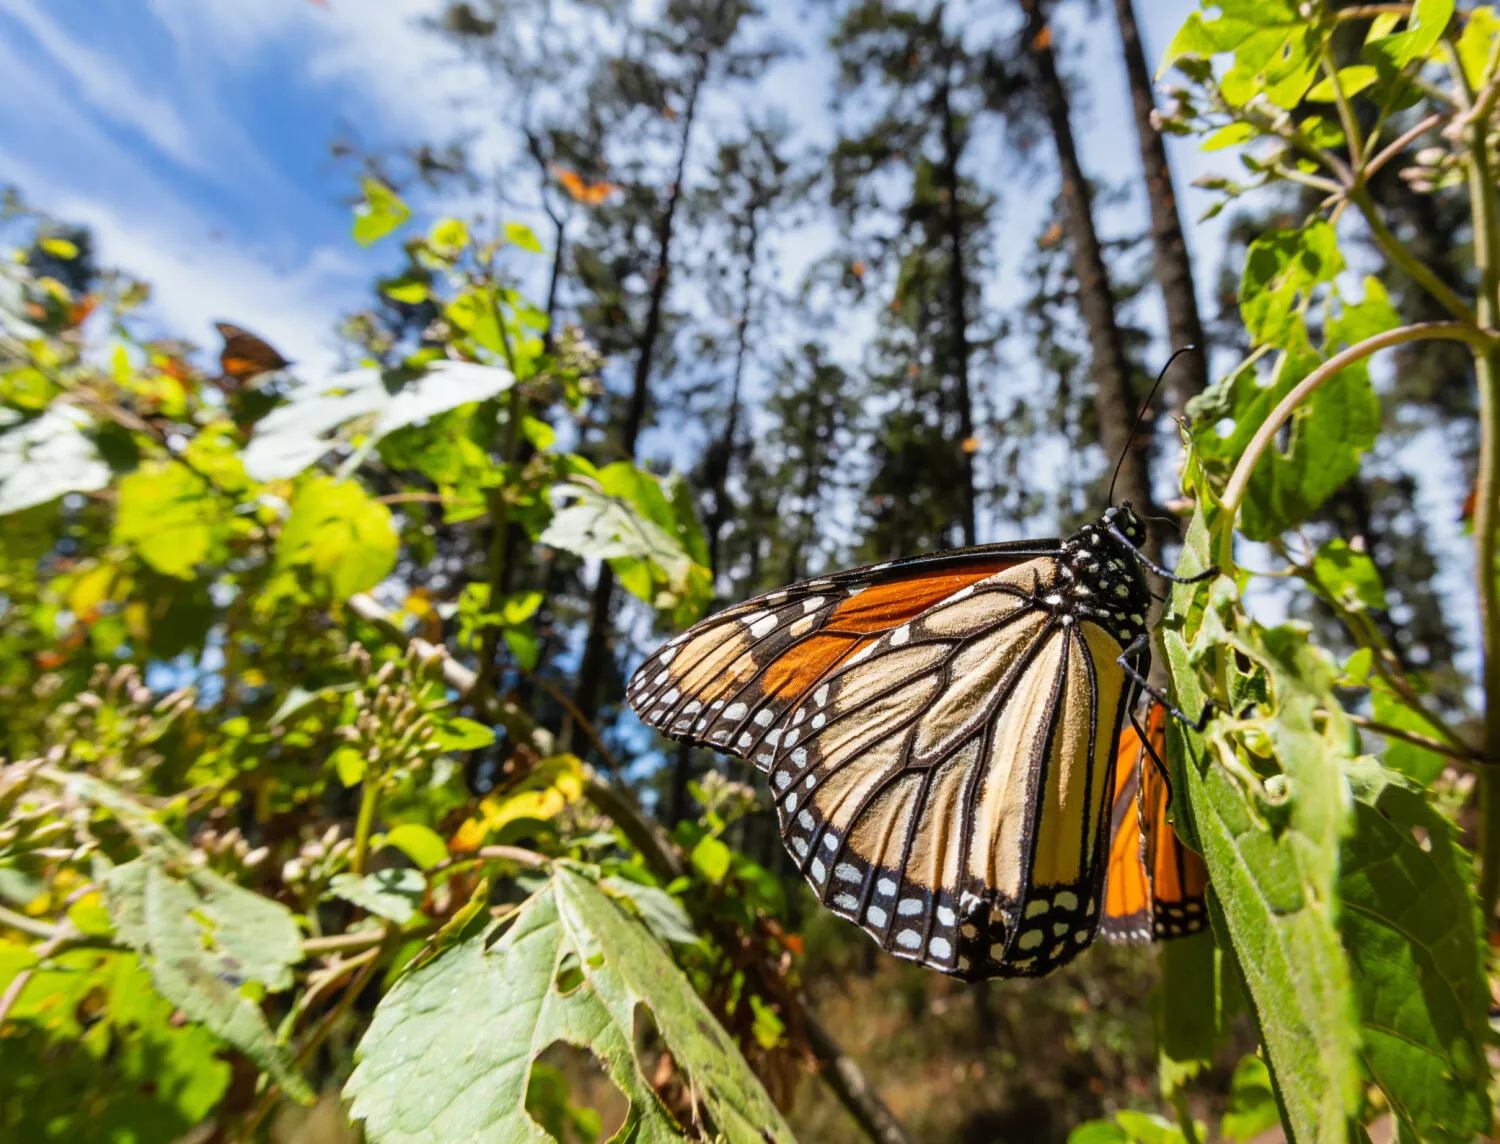 Rémy Cointreau Americas partners with WWF Mexico to protect Monarch butterflies in the Americas